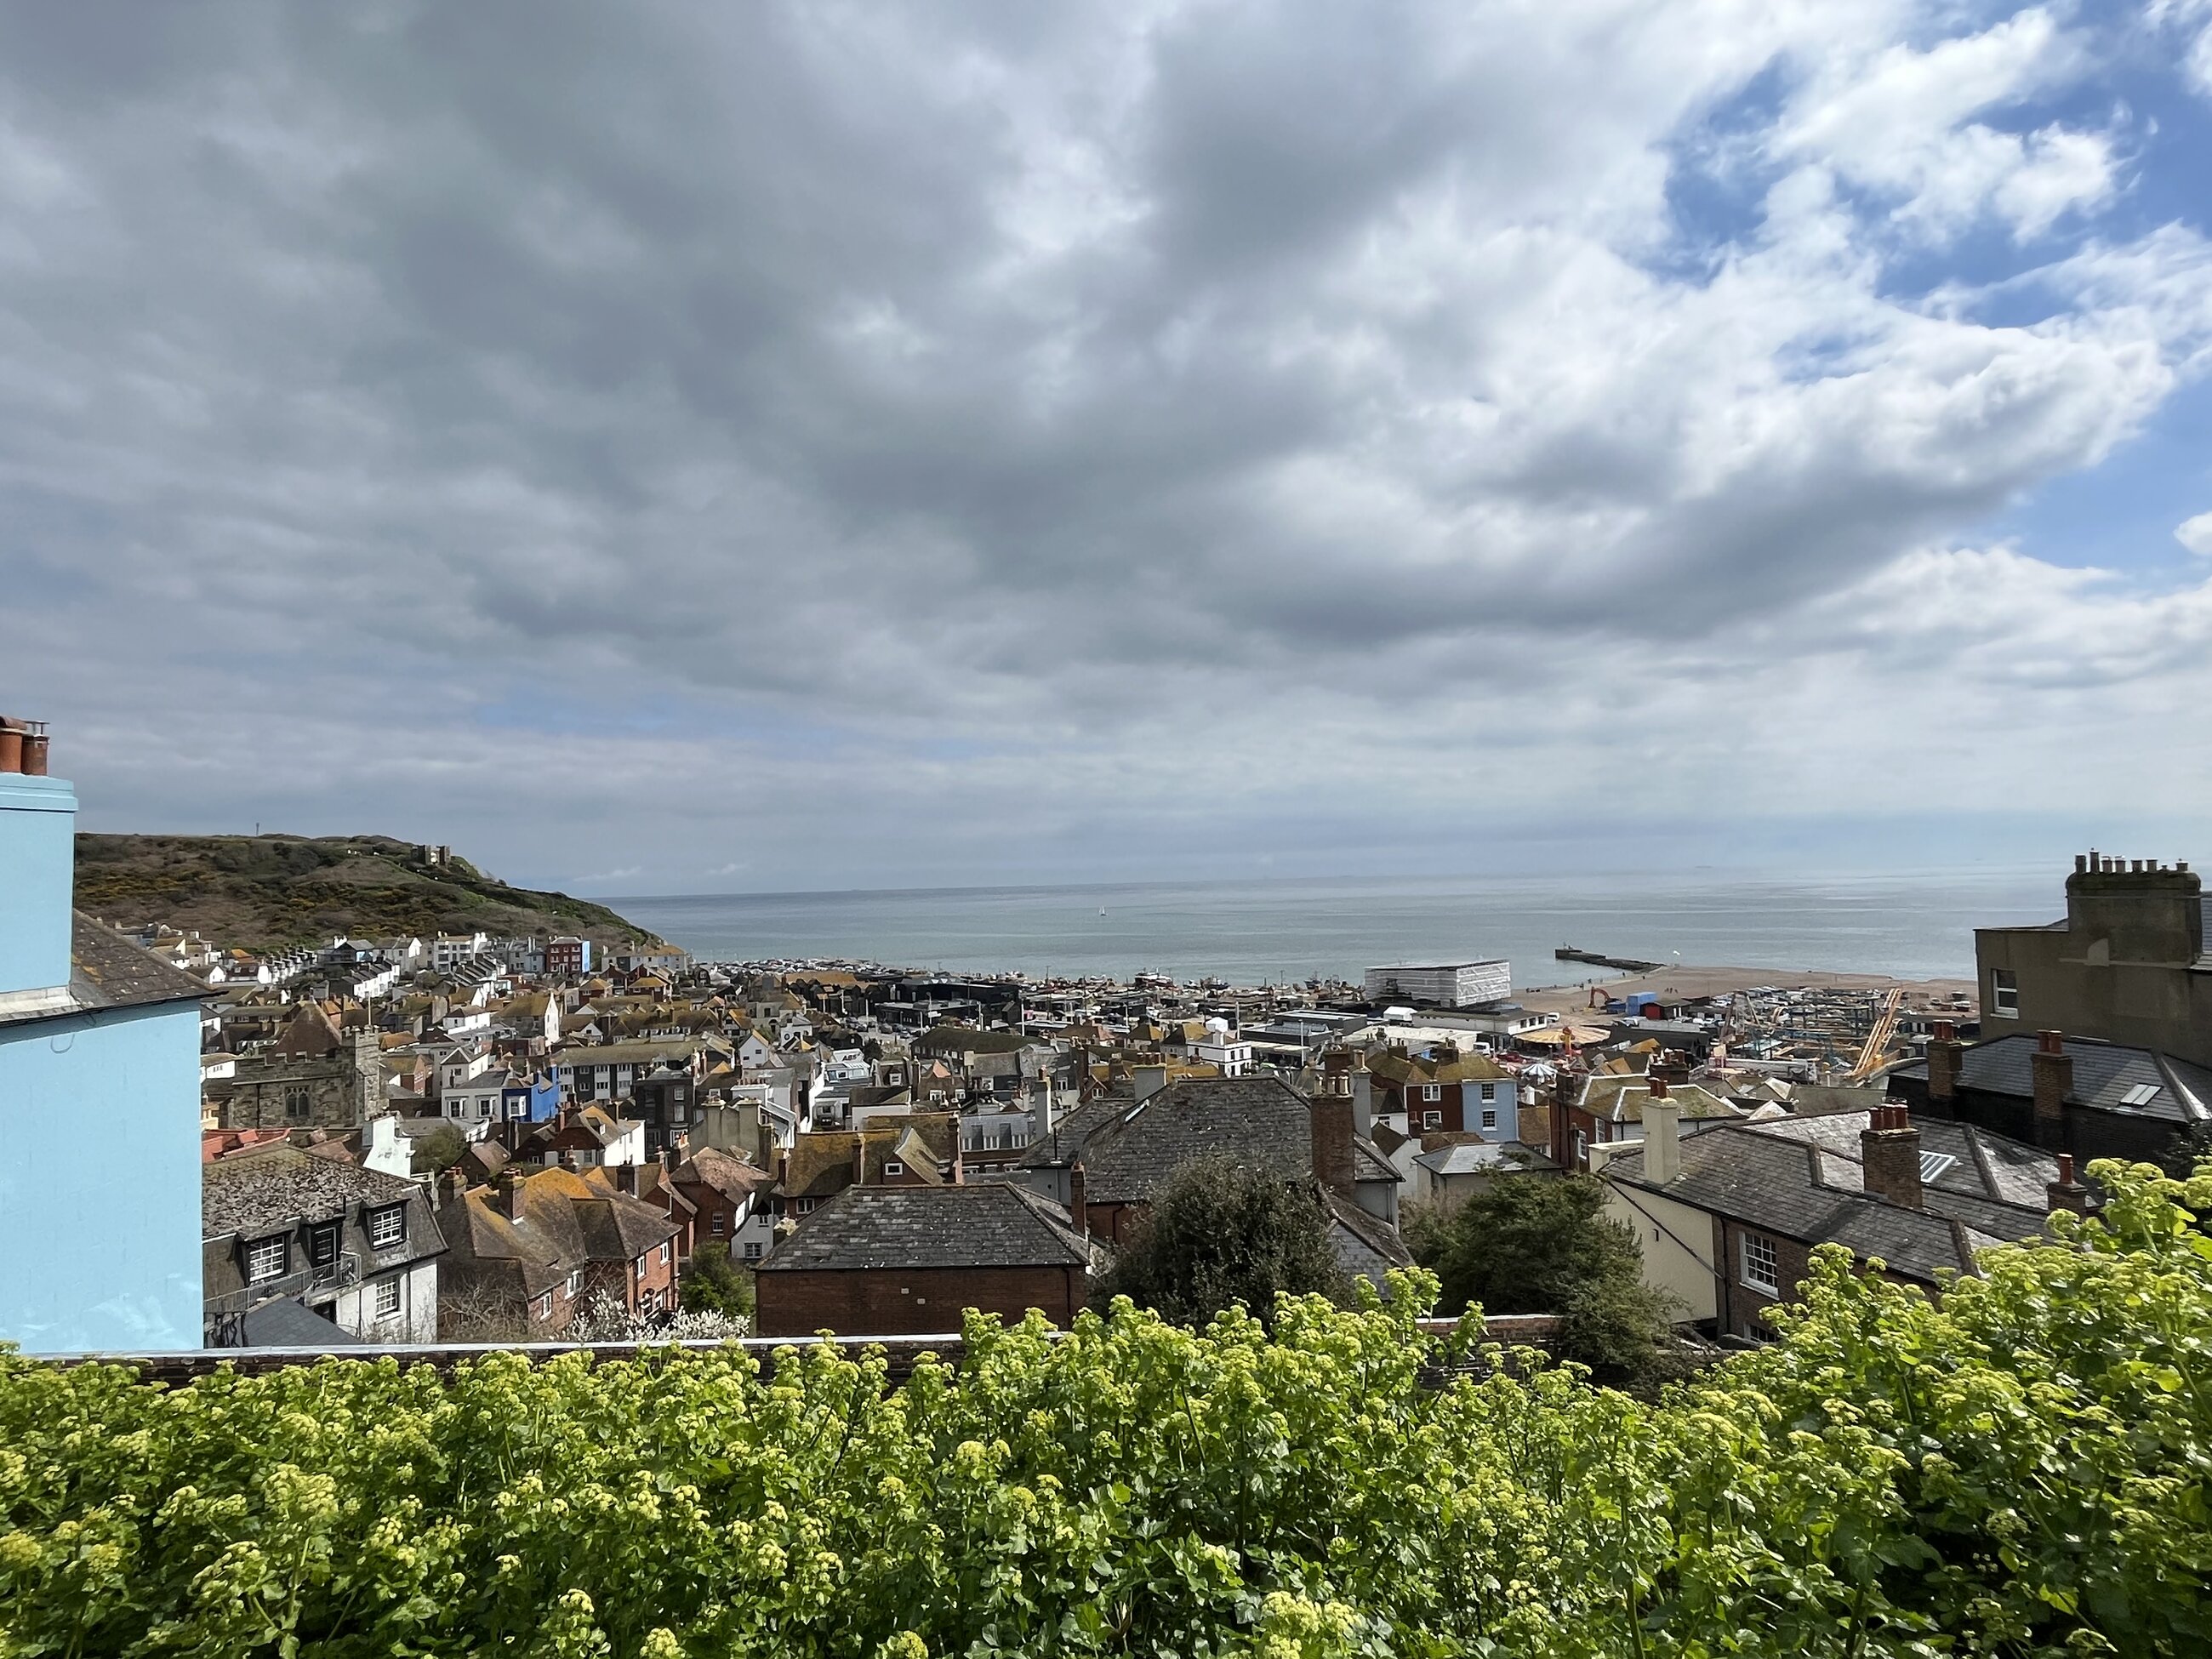 Visting the English coast in the seaside town of Hastings. A weekend trip with the program! 